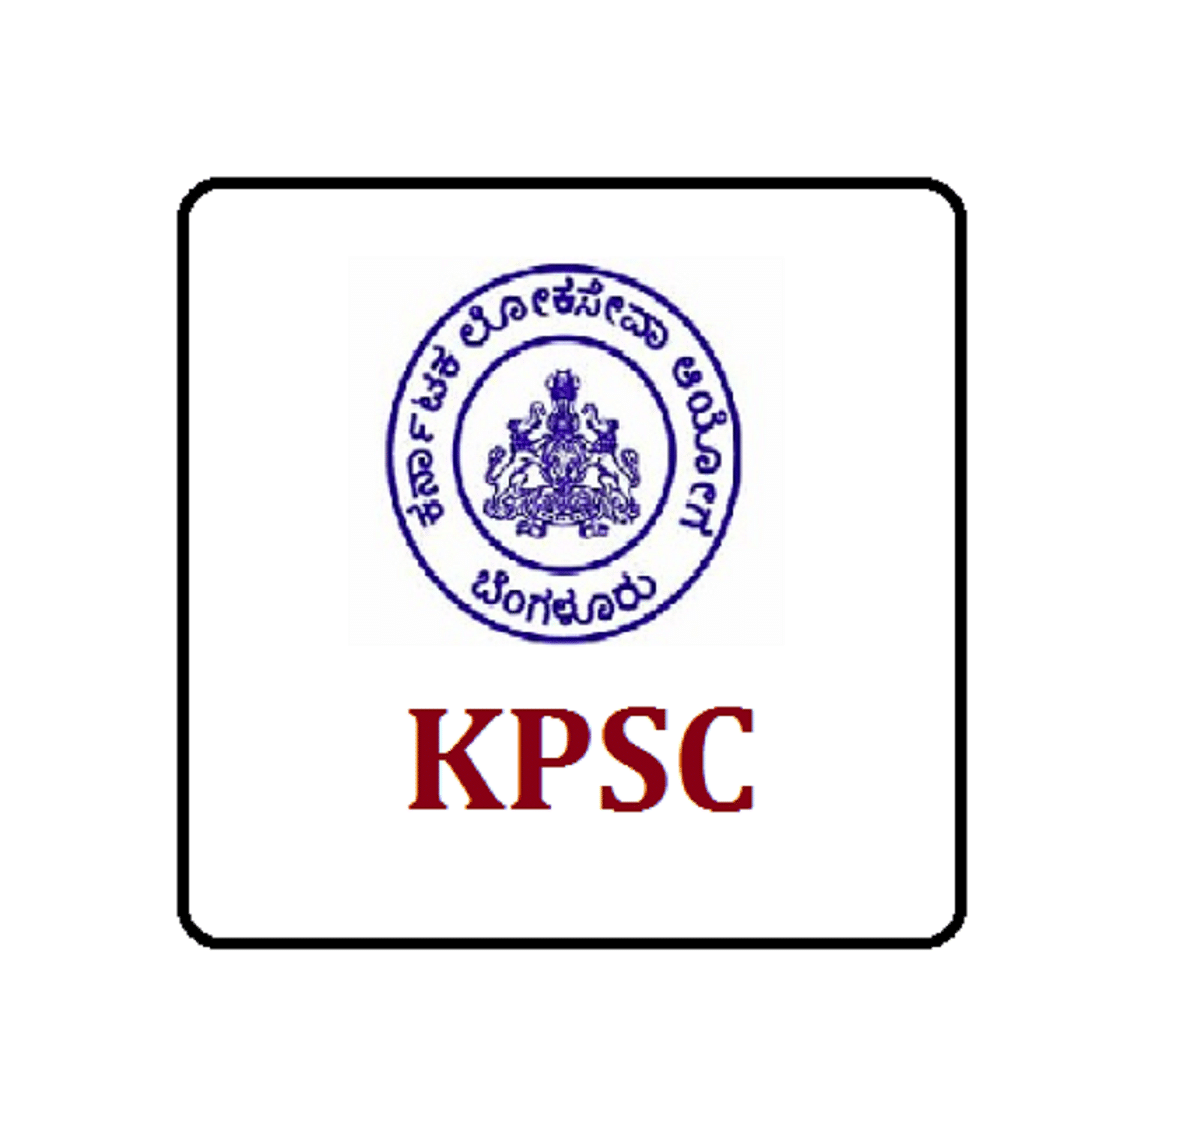 KPSC Group A&B 2019: Exam Schedule Released, Check Now